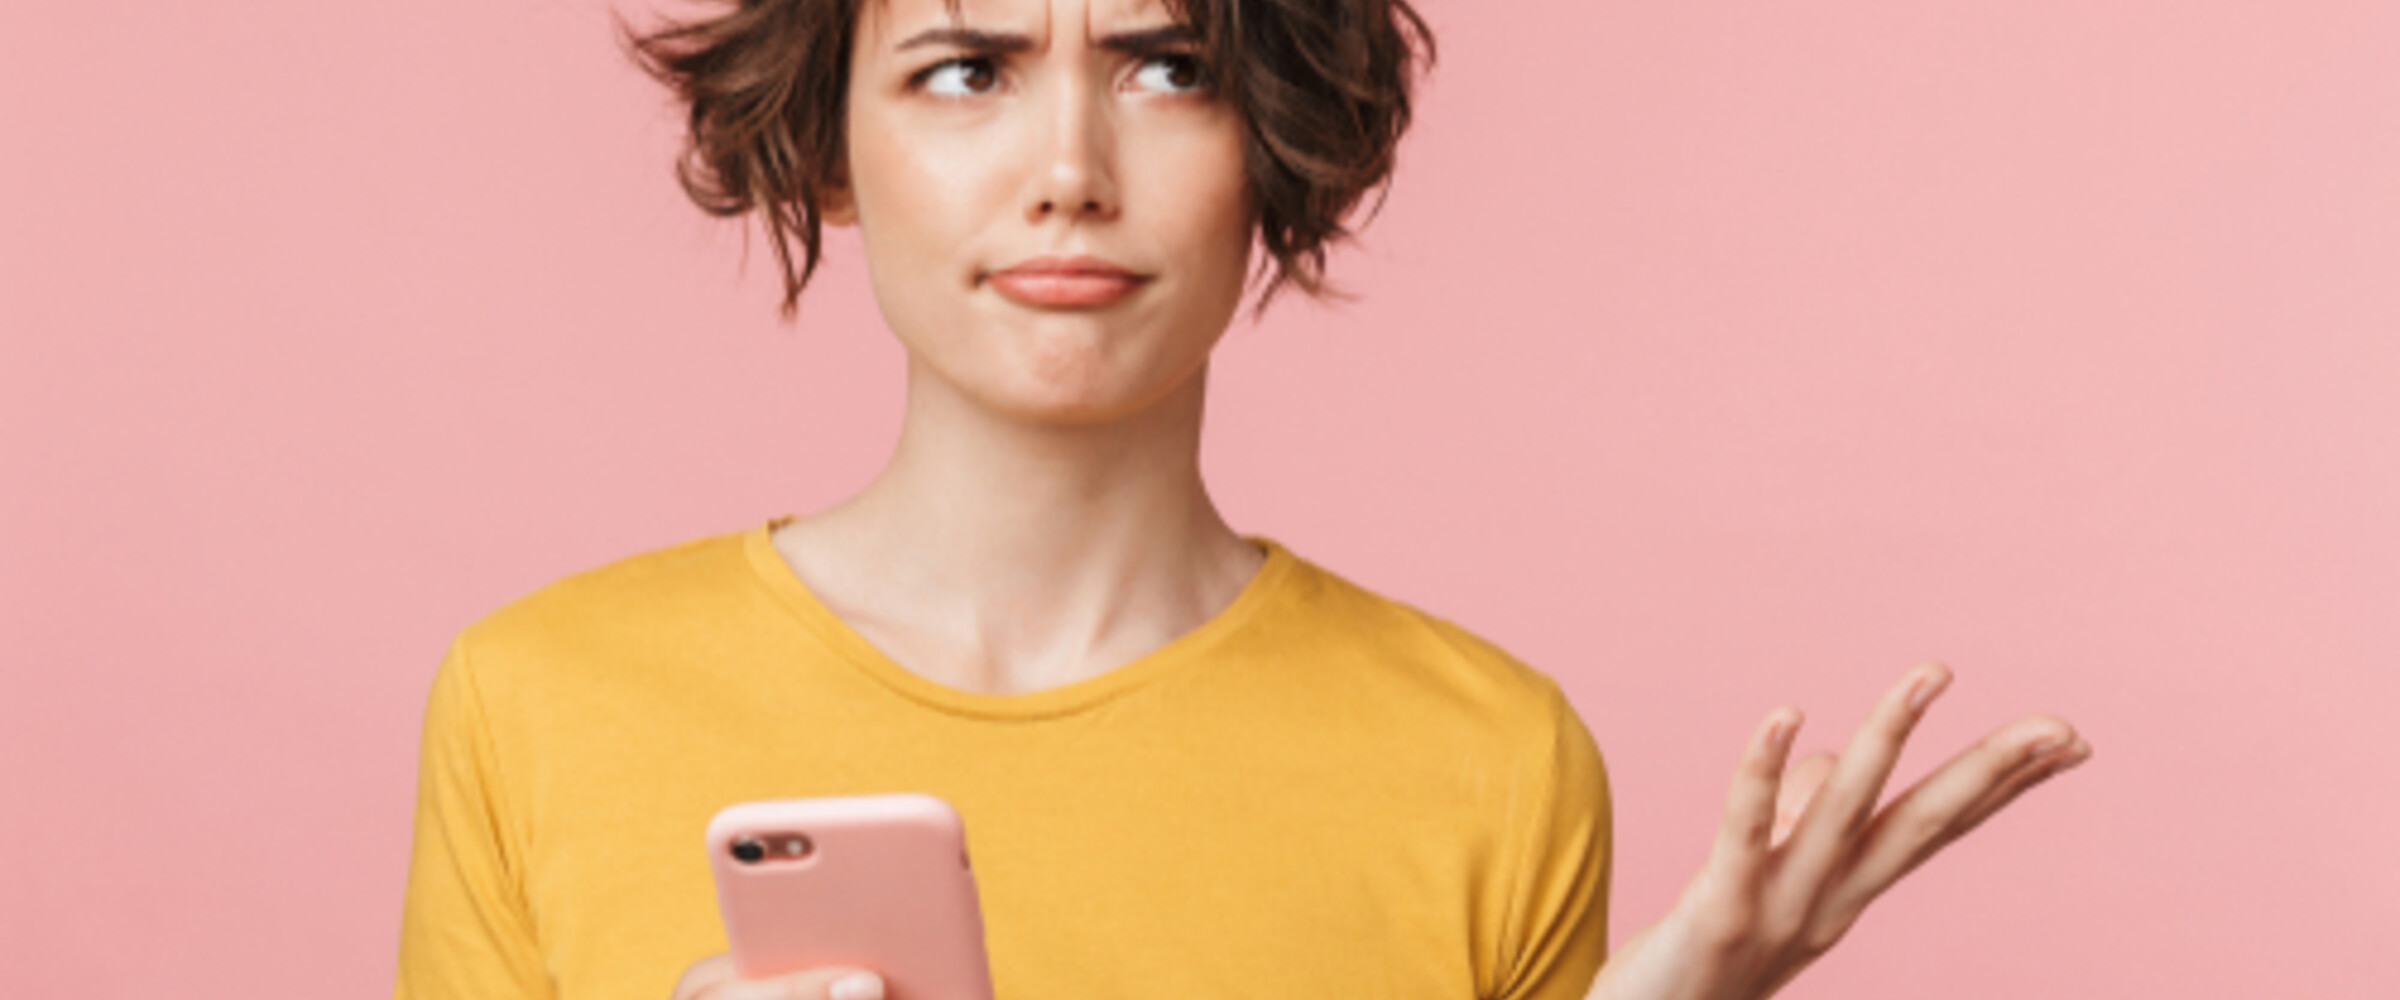 confused woman holding a phone